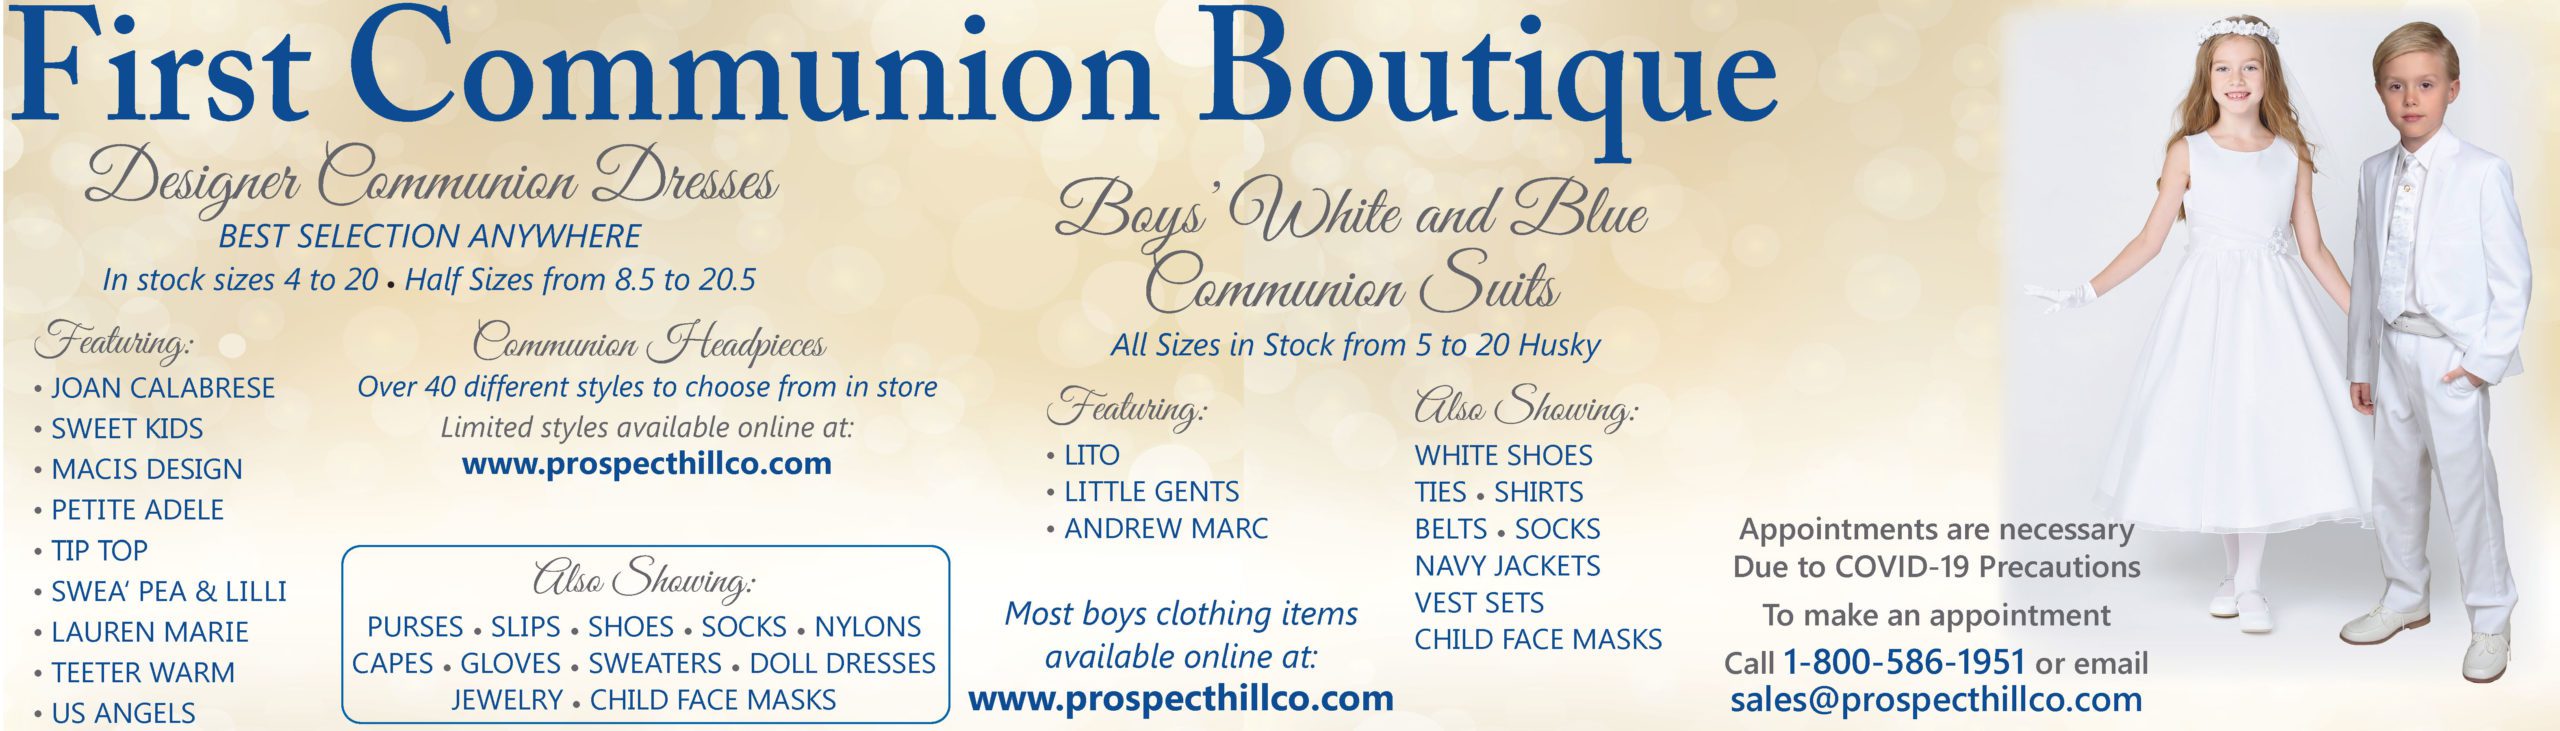 2022 First Communion Boutique at Prospect Hill Co in Brockton, MA | Religious Goods